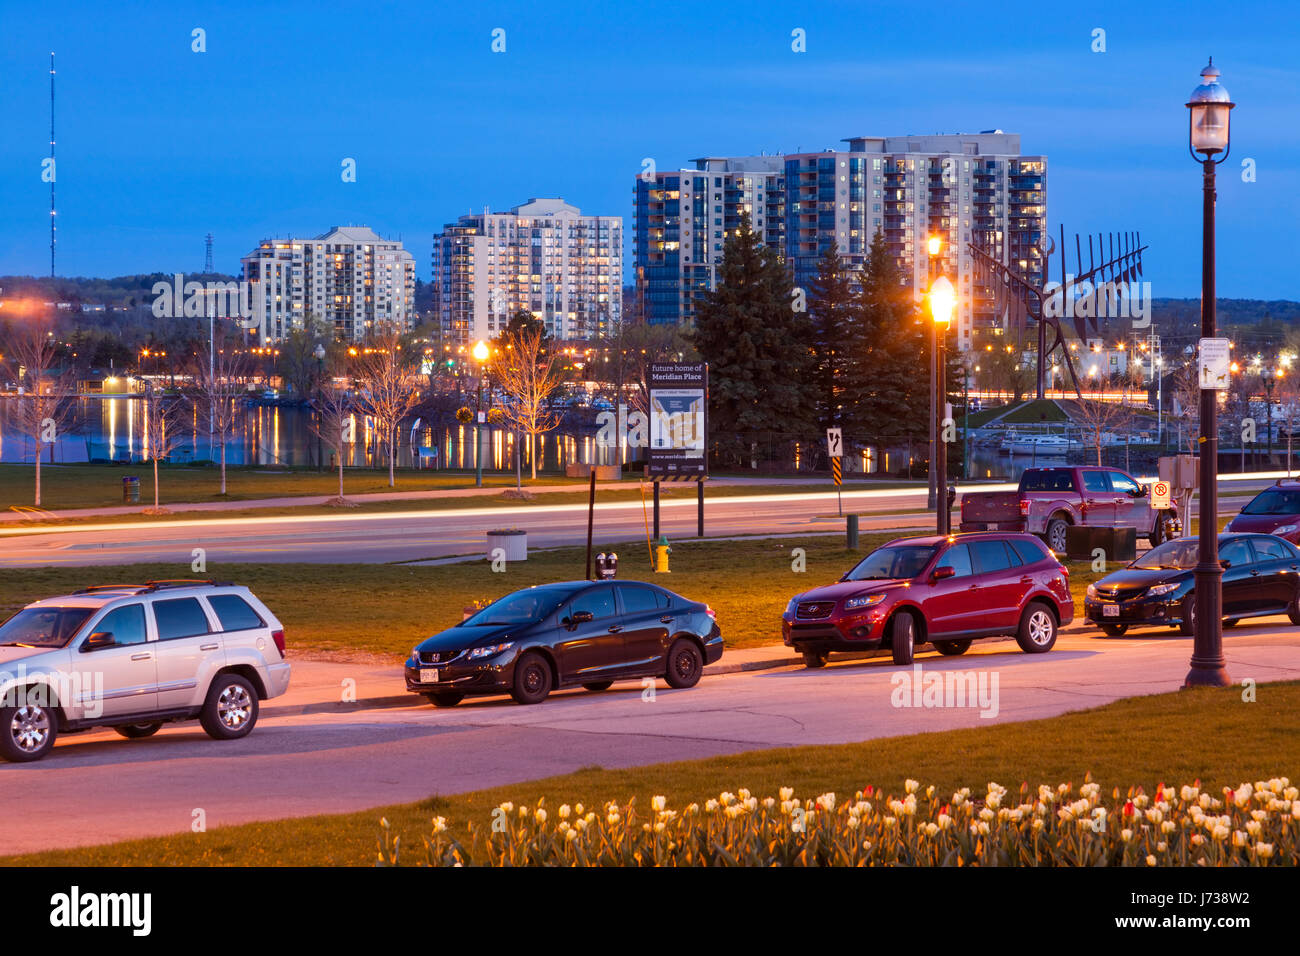 Apartment buildings along the waterfront at dusk. Barrie Ontario, Canada. Stock Photo